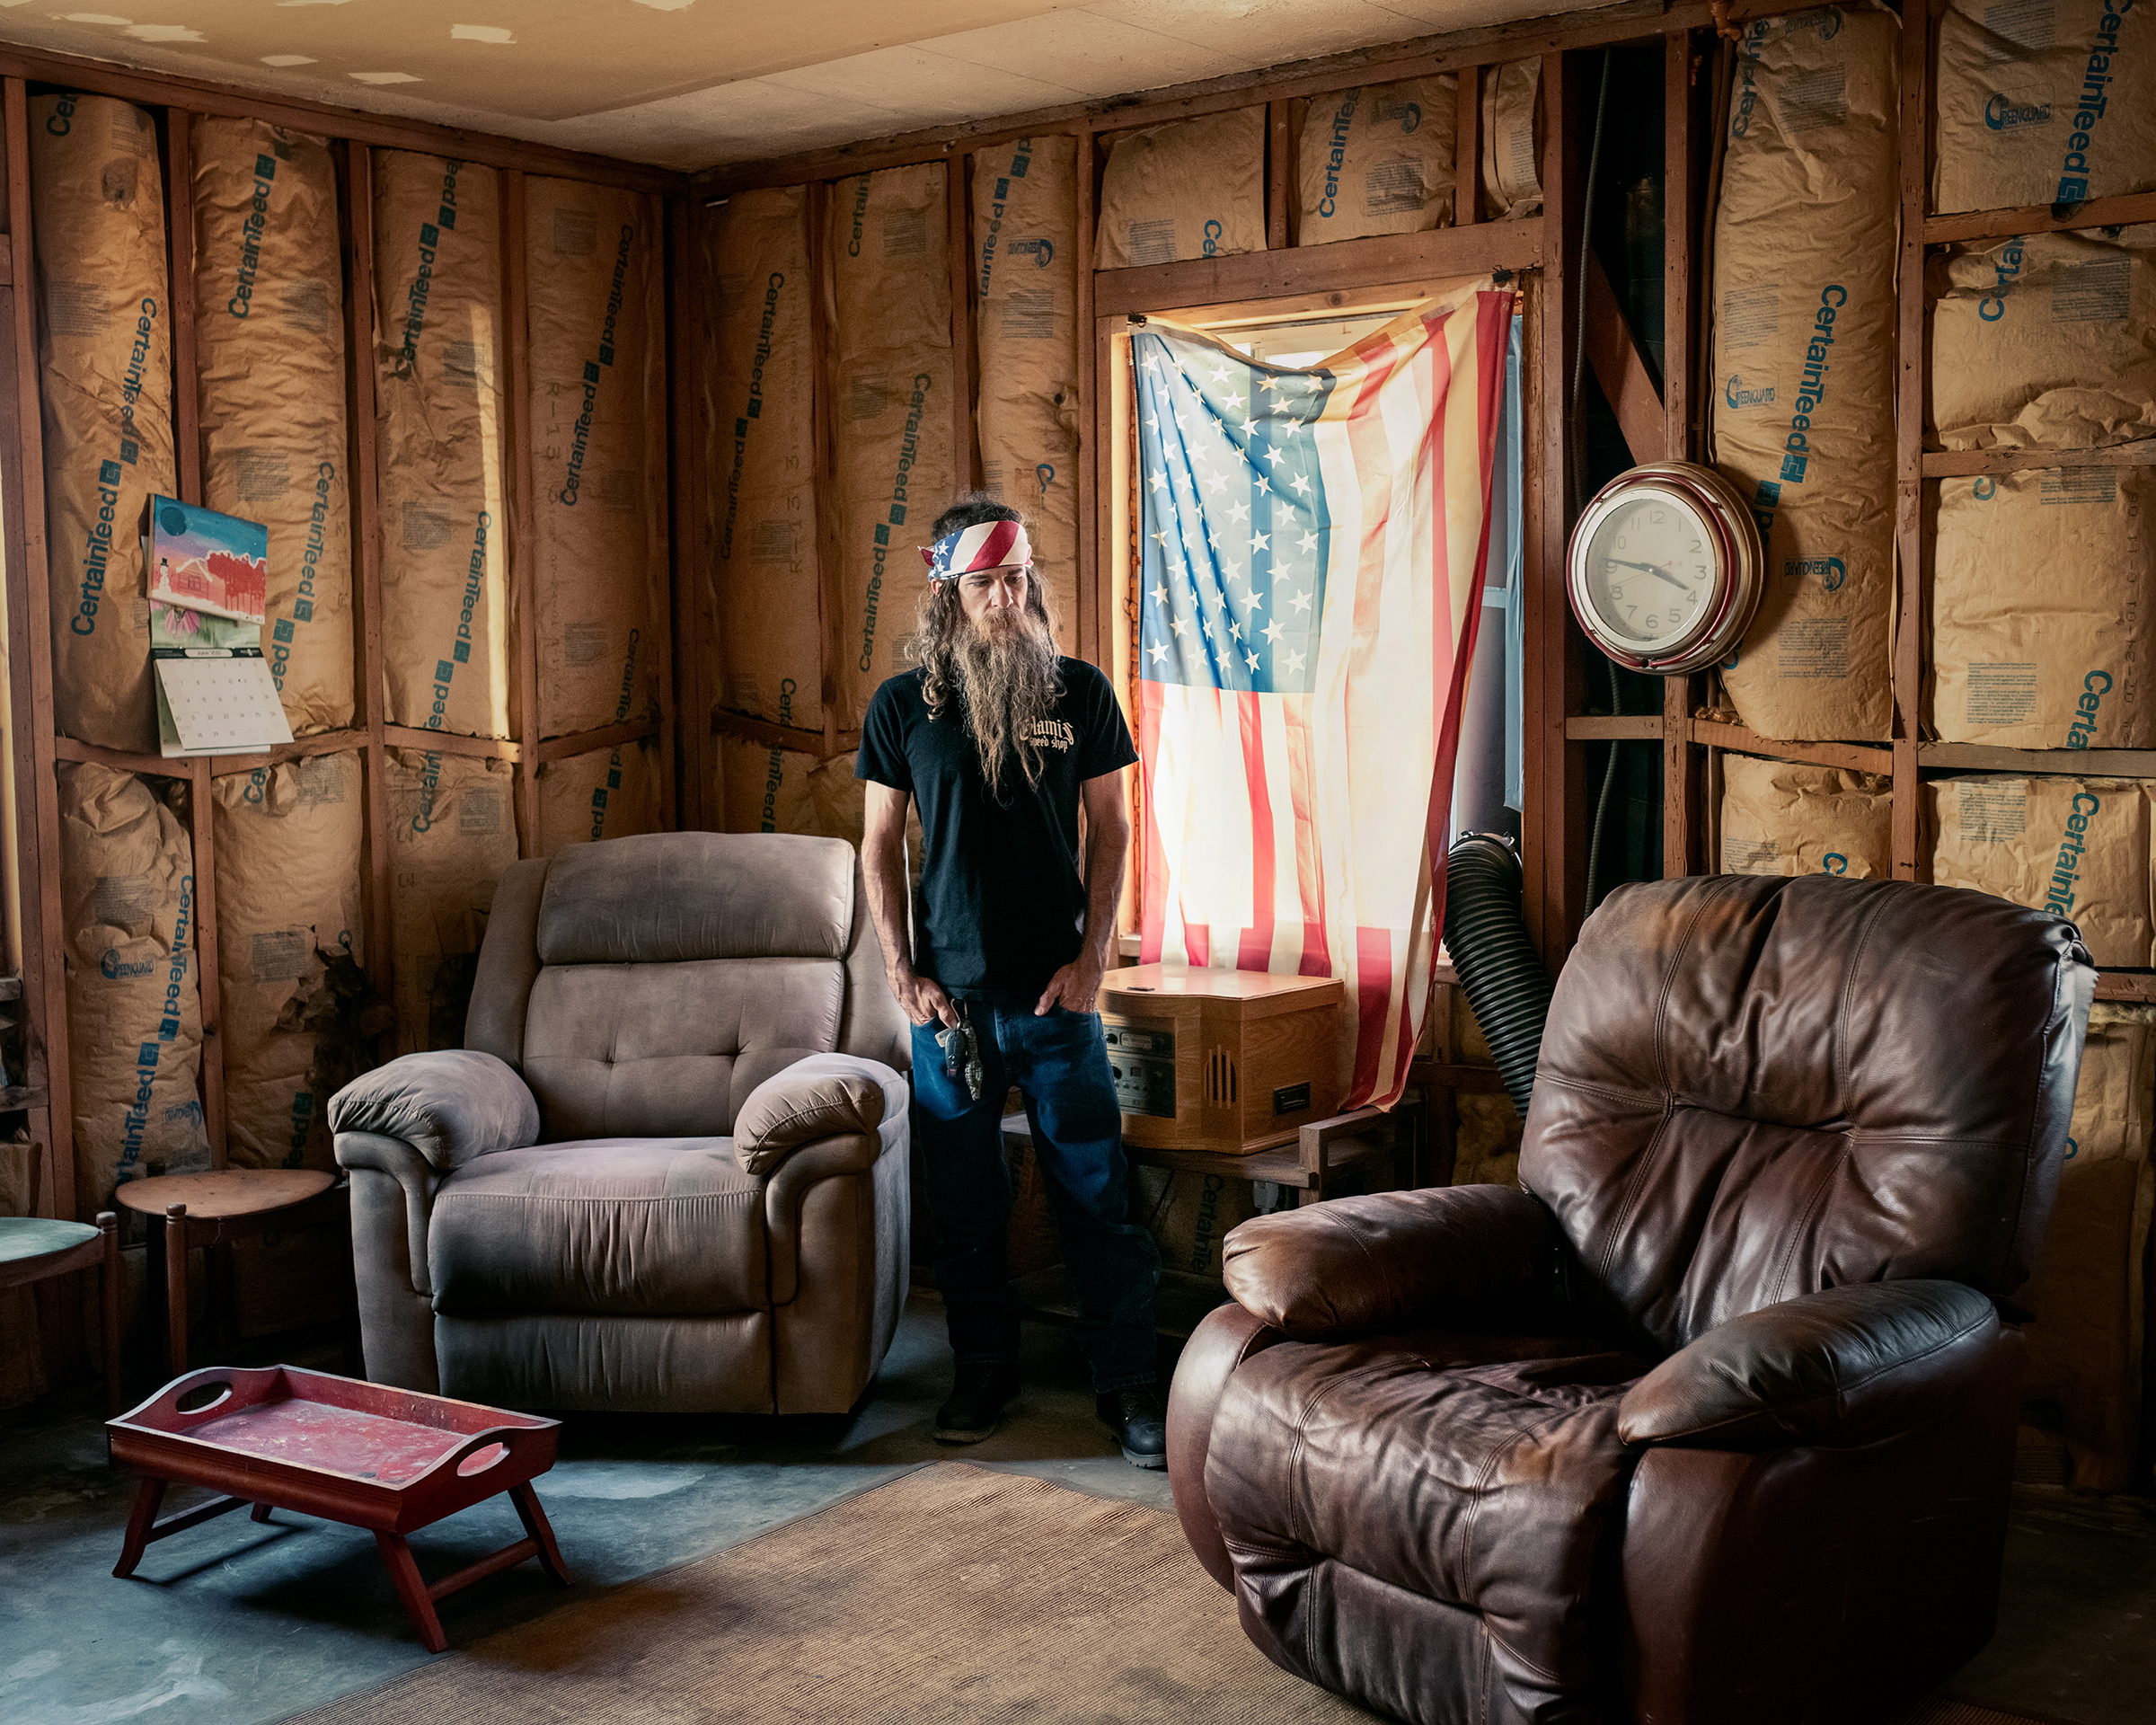 Jody Marquess, 43, looks at the recliner where his stepfather John Ramer <a href="https://time.com/extreme-heat-climate-change/">died</a> in Goodyear, Ariz., on June 17. It was Marquess’s birthday, but he was concerned about the 69-year-old, who eschewed air-conditioning. “He had tough-guy syndrome,” Marquess told TIME six days later, recalling a “stubborn” and “very frugal” but also “honest and simple” man. When Marquess stopped by on June 17—the high reached 118°F—he installed a portable AC unit for Ramer, who was sleeping. Two hours later, when he returned to drop off ice cream, Ramer was dead. From April through July, Maricopa County confirmed 47 heat-associated deaths, more than triple the figure confirmed by the end of the same period last year. Marquess had long wondered if this was how Ramer might die in Arizona: “I just didn’t think it was going to be this soon.” (Adam Ferguson for TIME)